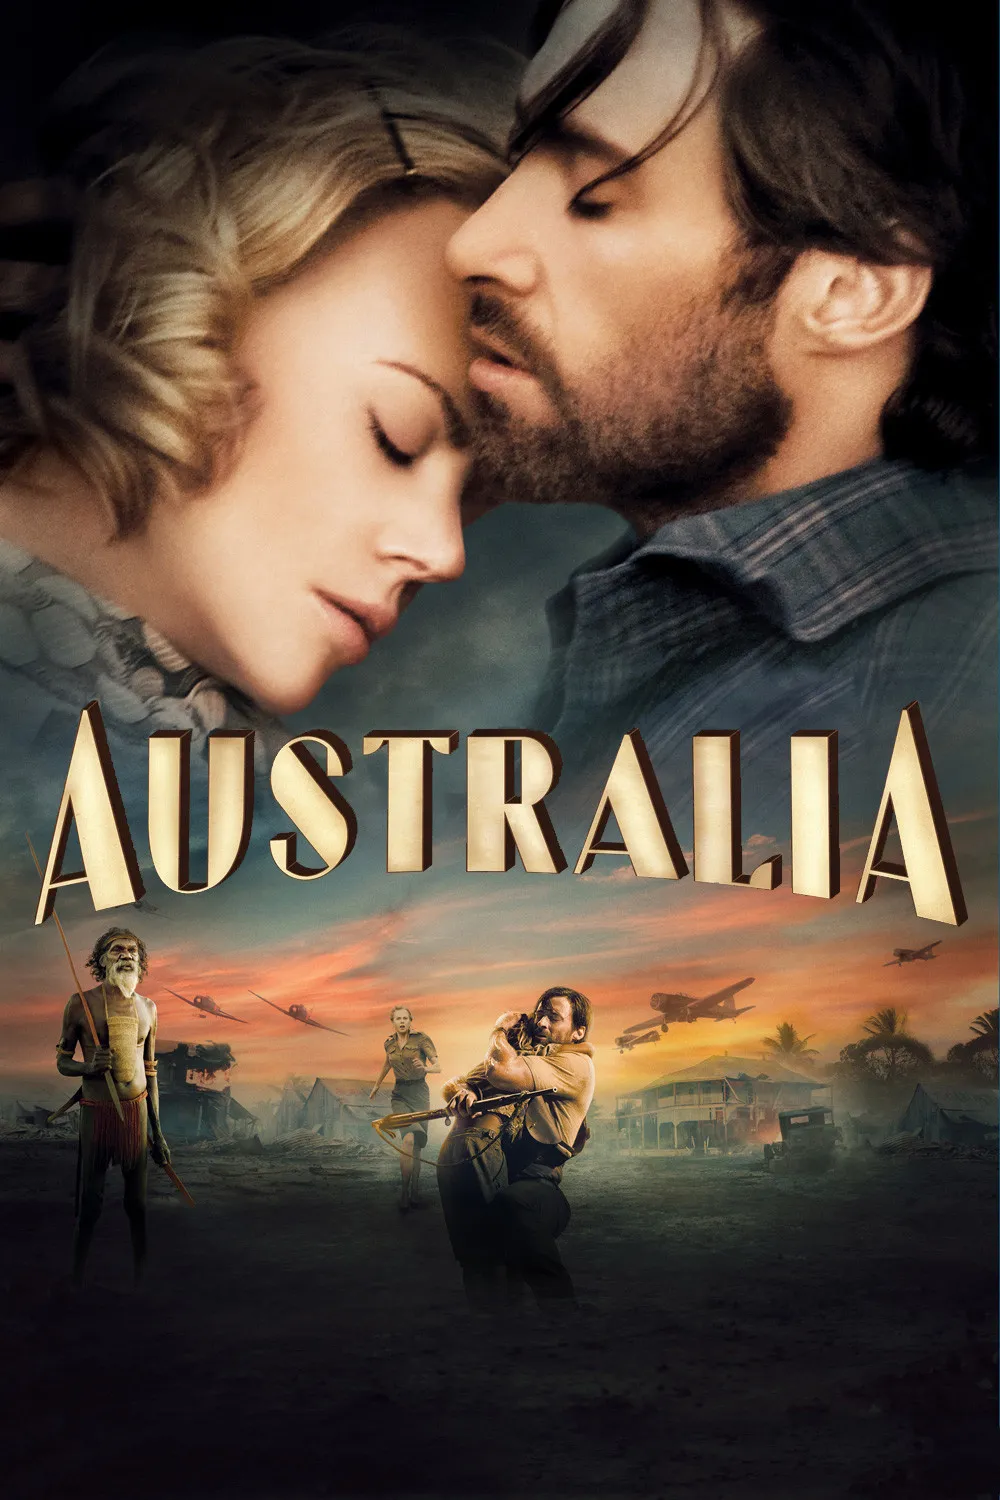 "Australia" will be recut into a 6-part limited series 'Faraway Downs' for streaming | FMV6